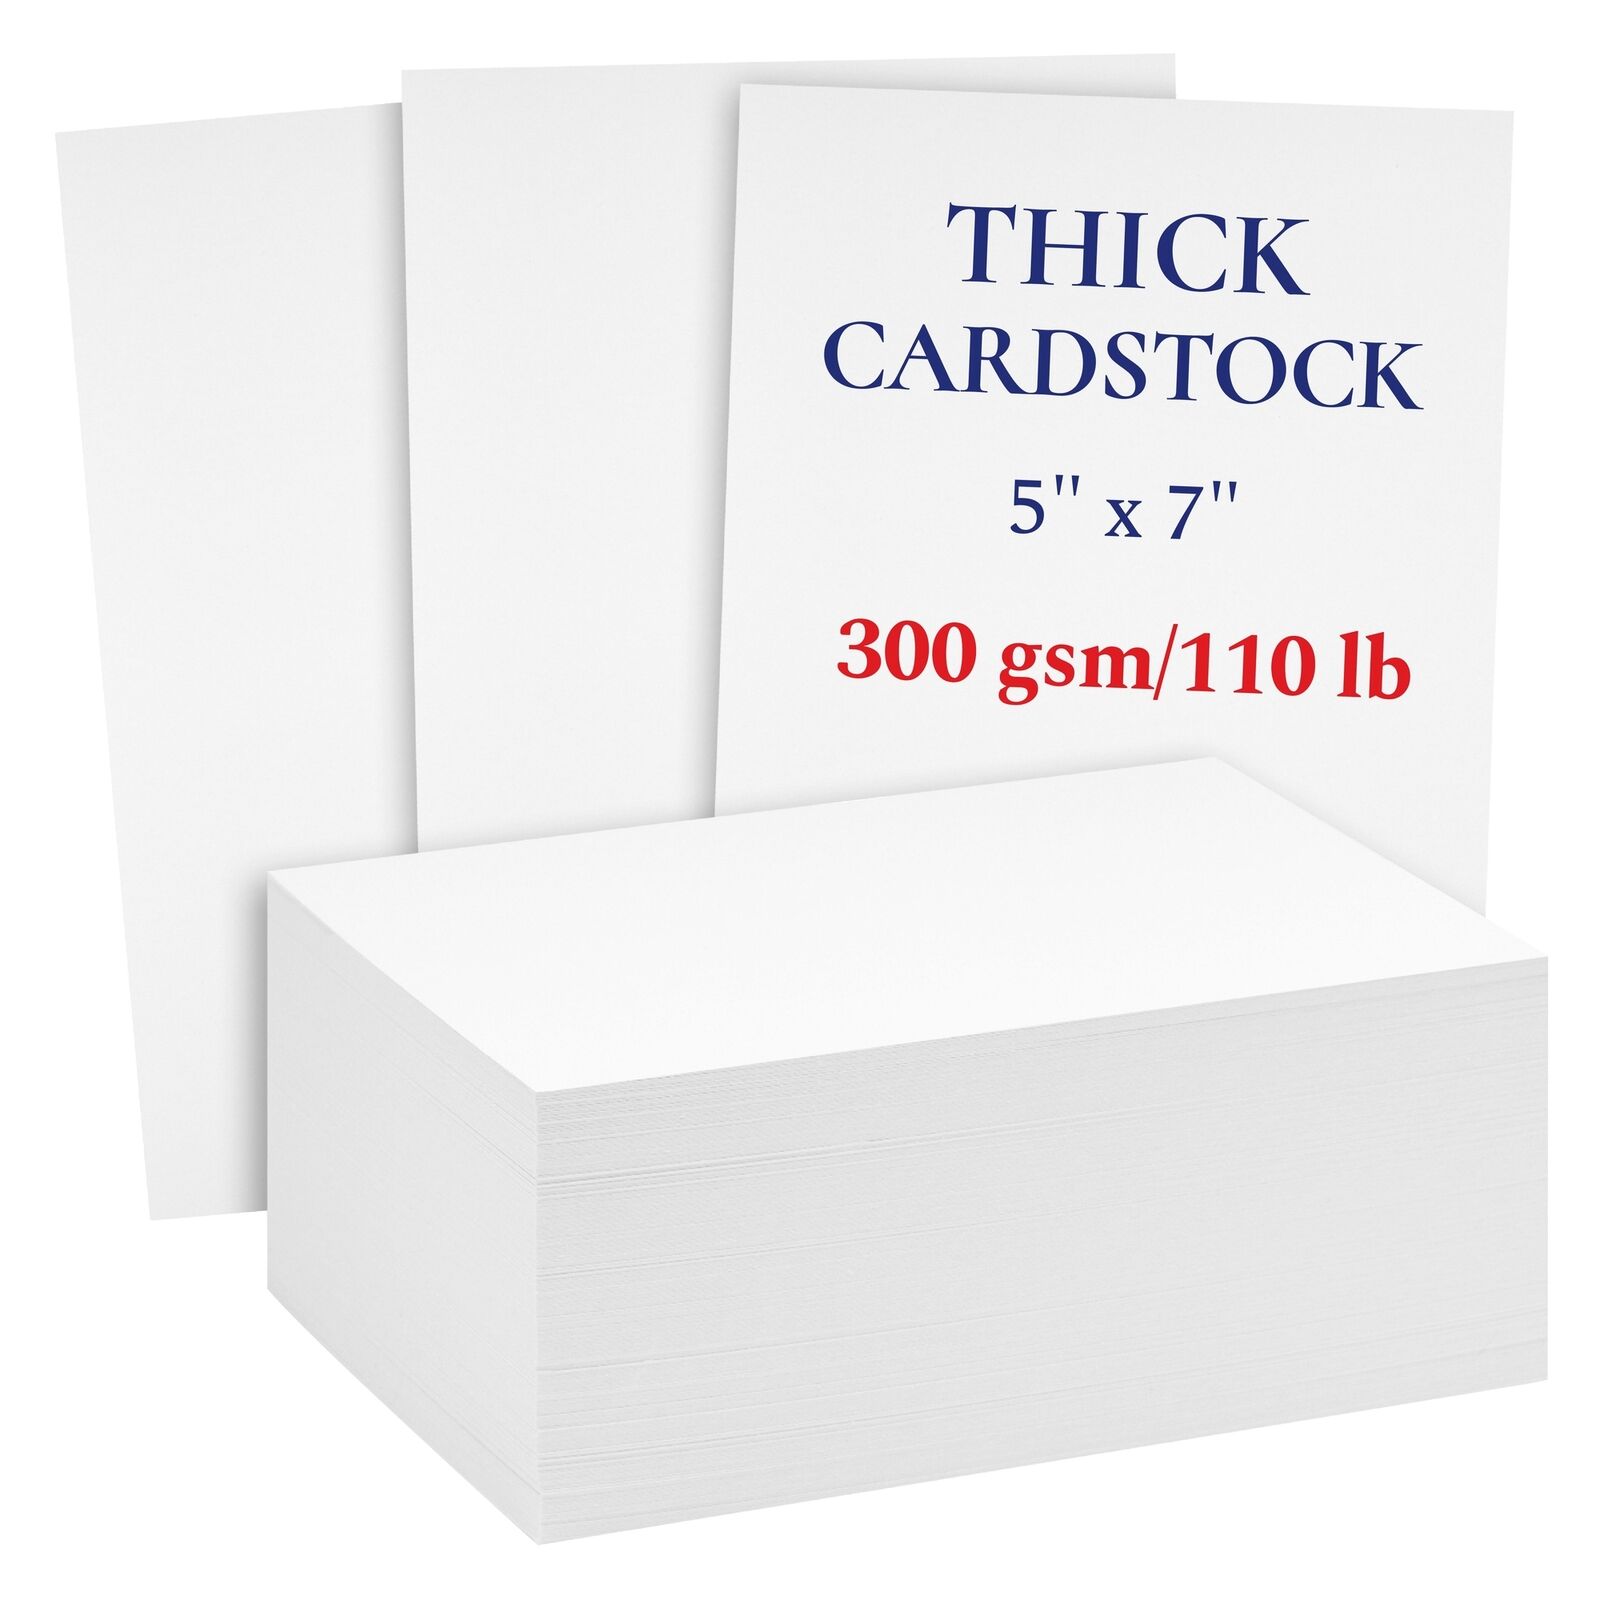 200 Sheets 5x7 110 lb/300 GSM Cover Thick Cardstock (White)